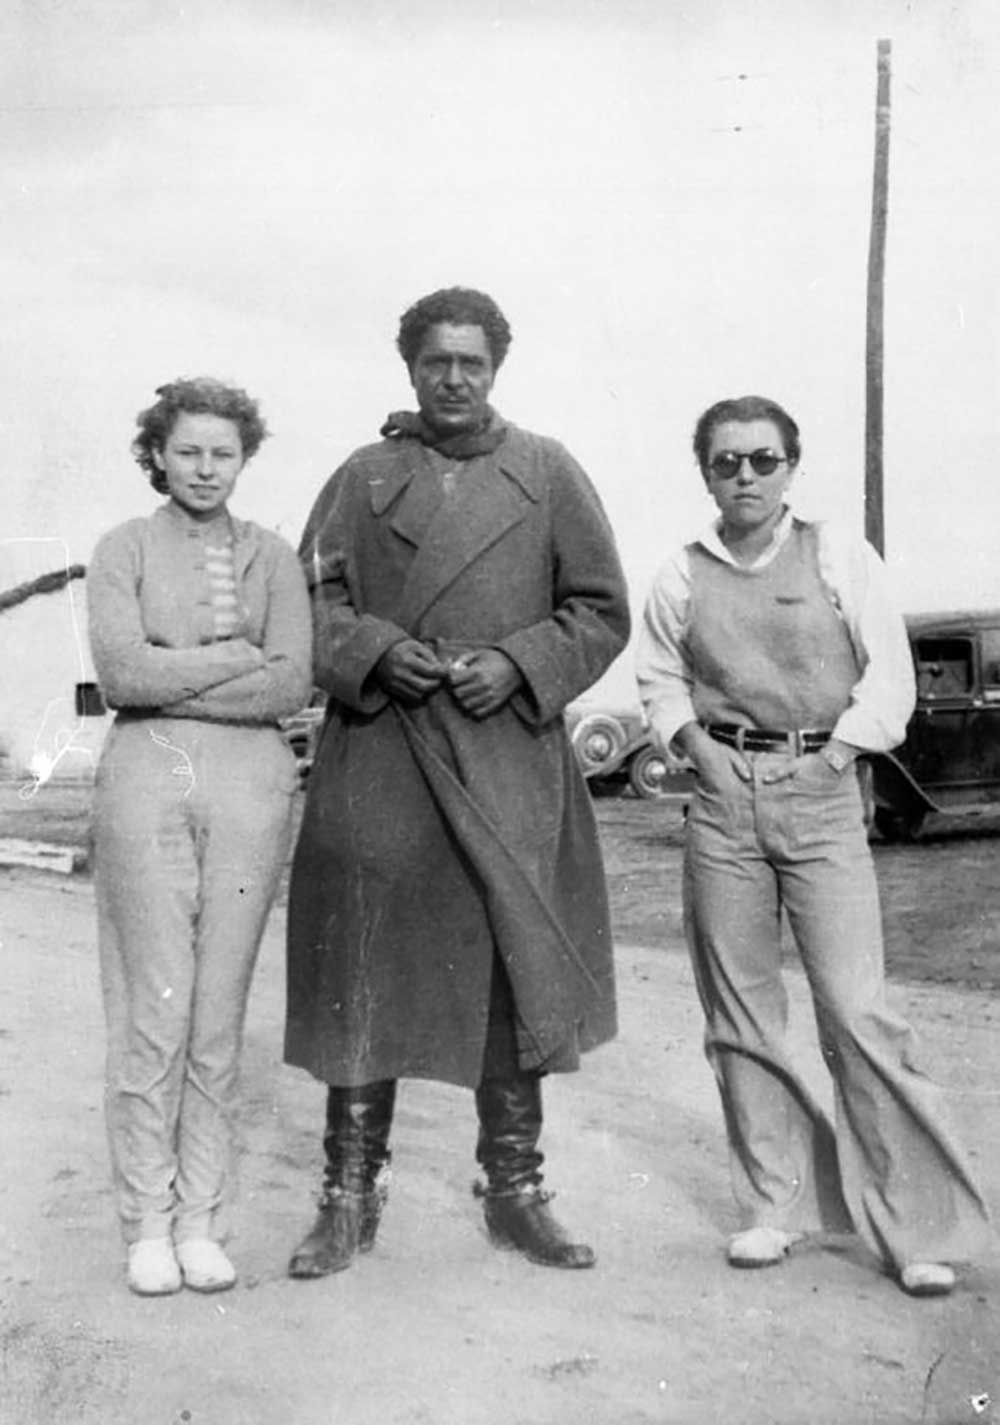 Black-and-white photograph of a man in brownface between two young women.